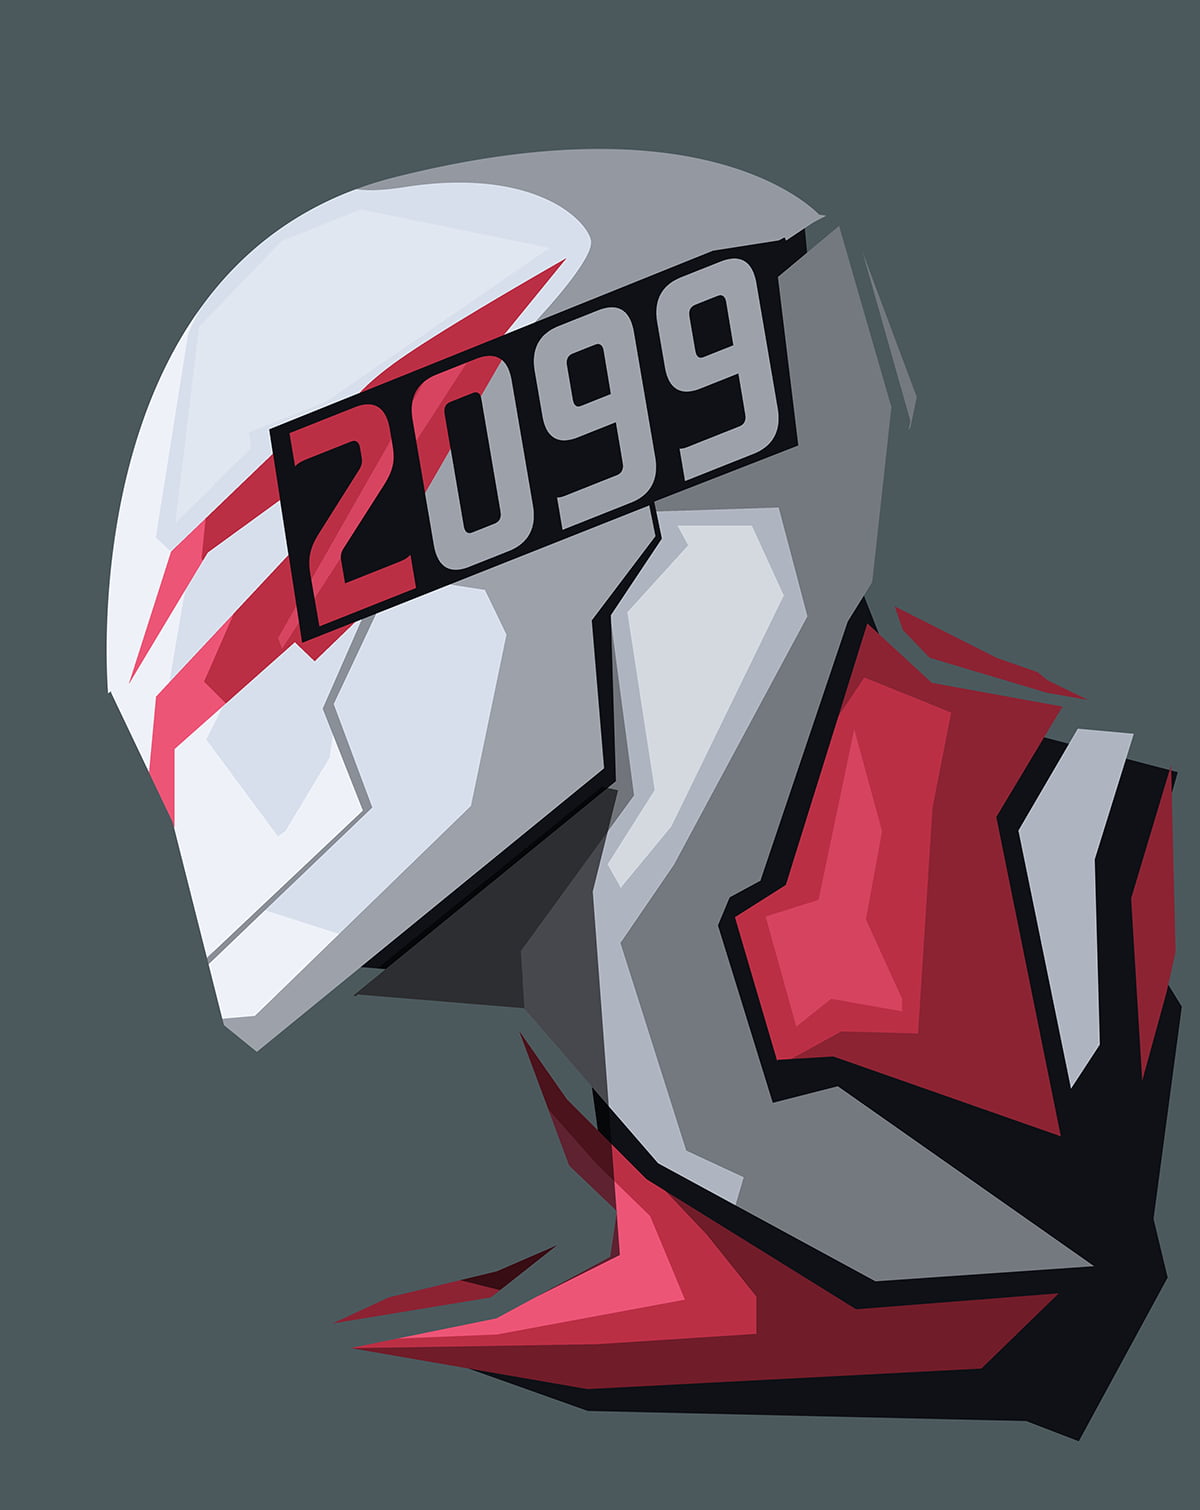 white and red 2099 illustration, Spider-Man 2099, Marvel Comics, gray background